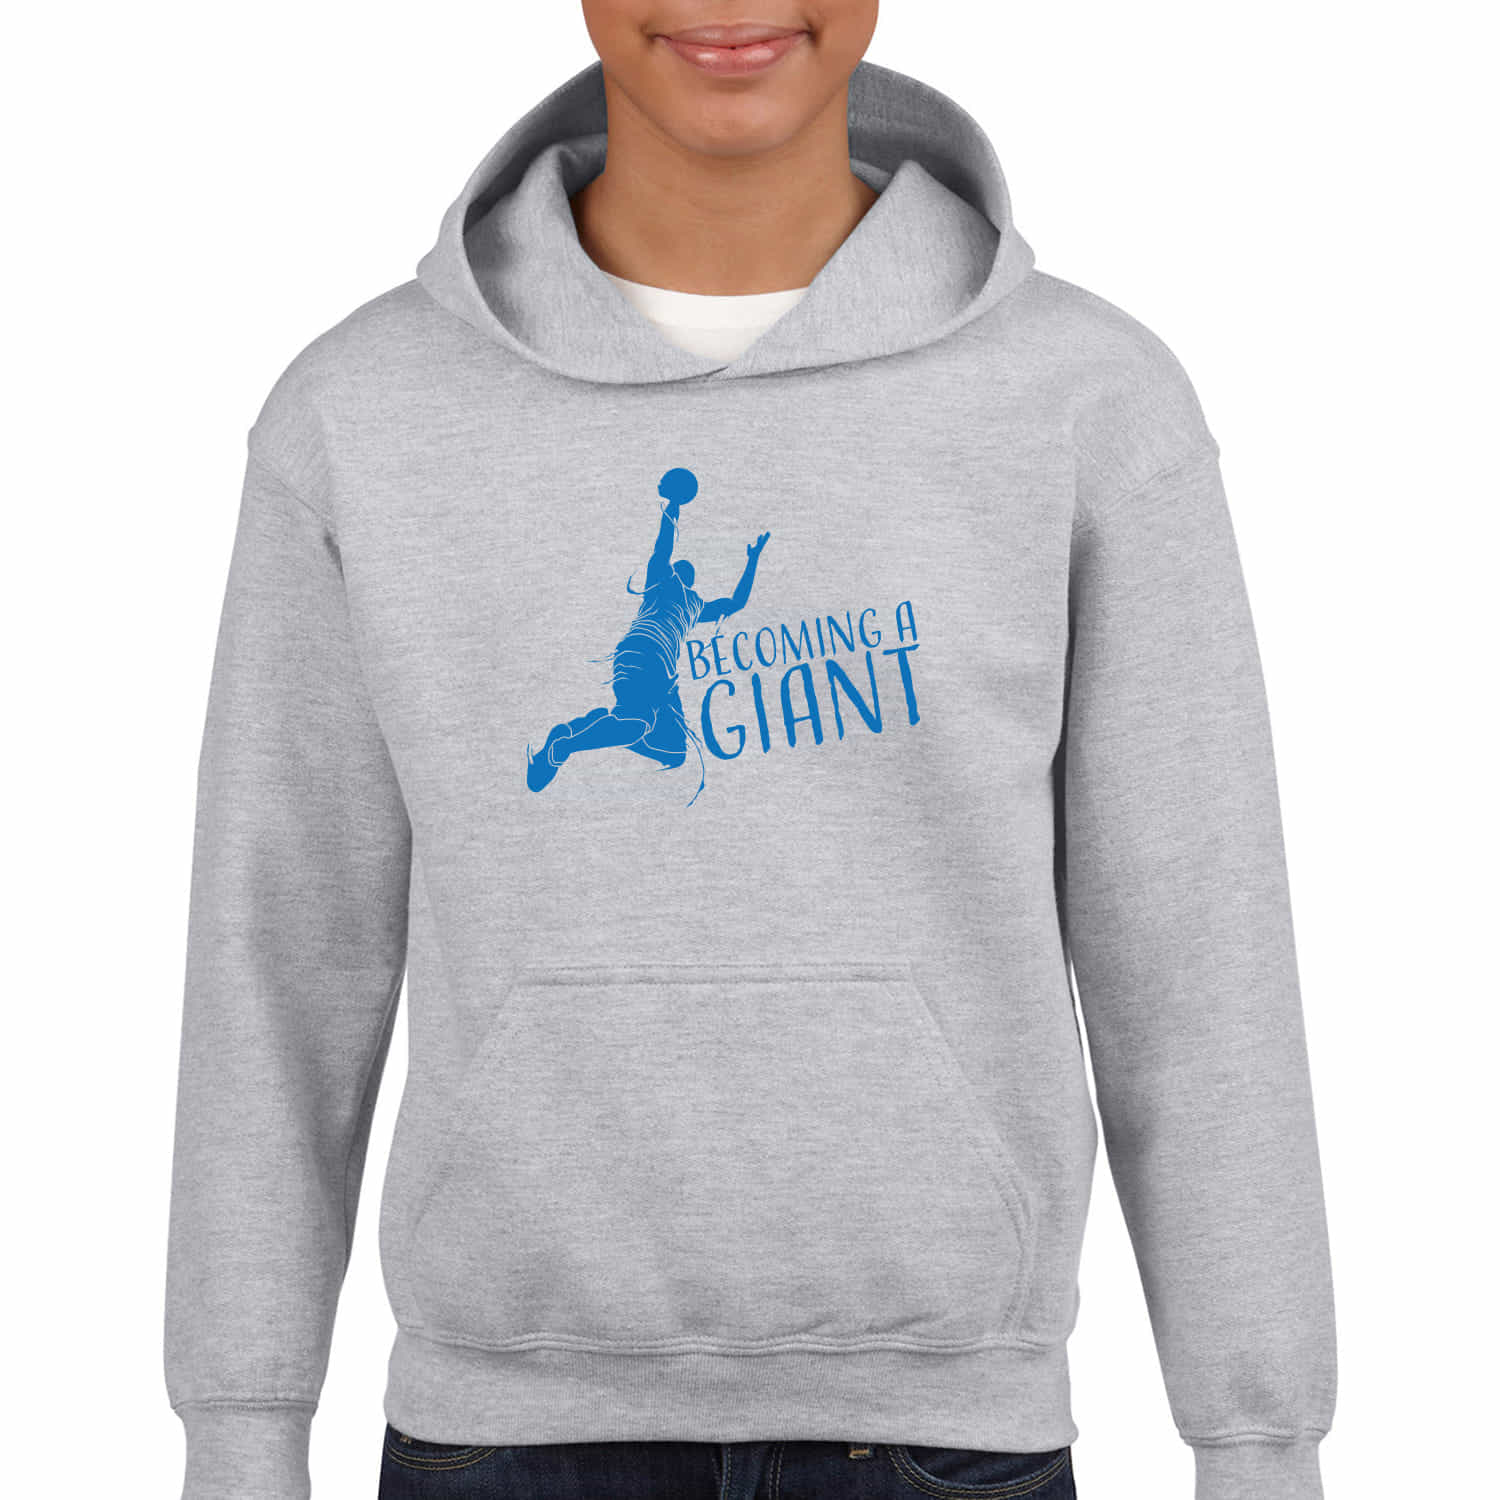 Kinder Hoodie "Becoming a Giant"